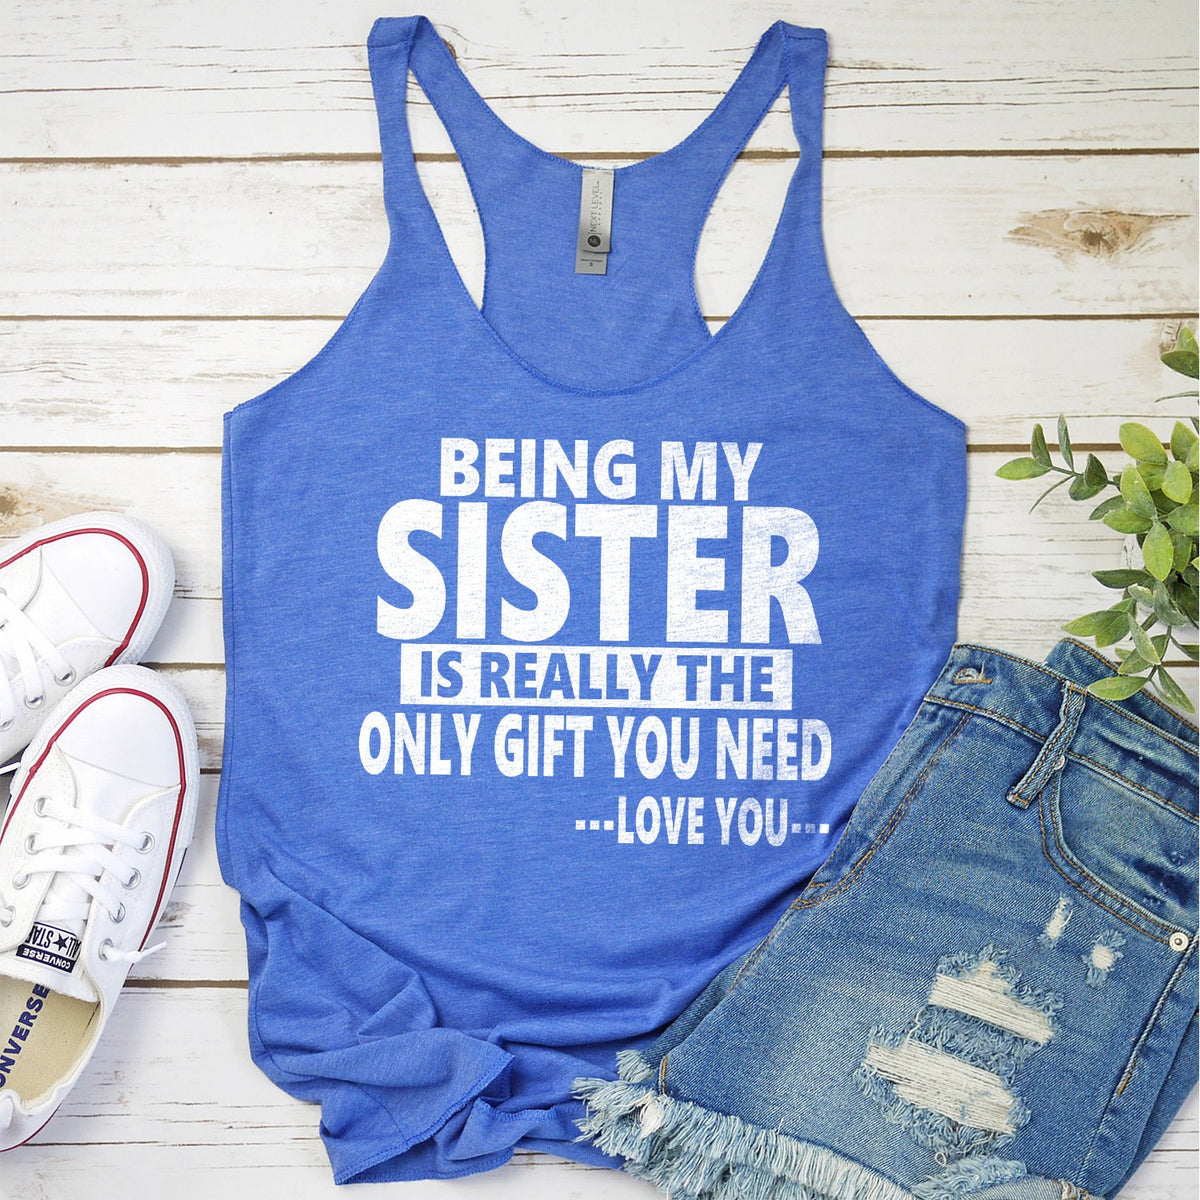 Being My Sister is Really The Only Gift You Need...Love You... - Tank Top Racerback